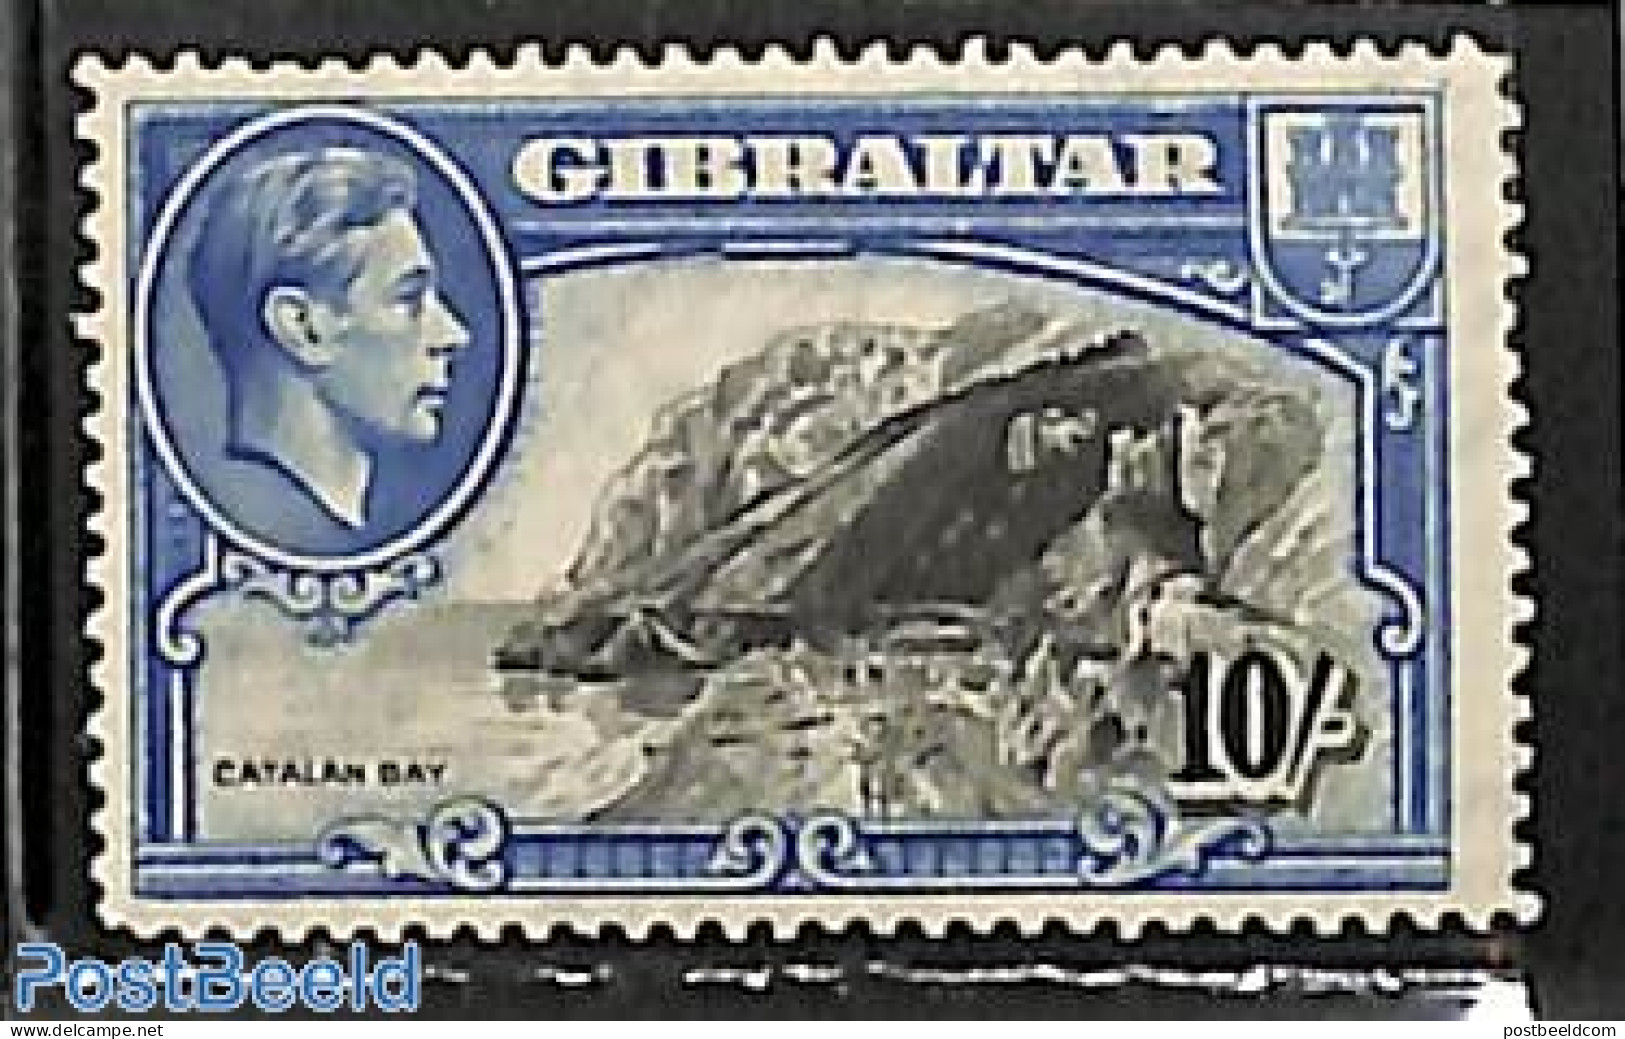 Gibraltar 1938 10Sh, Perf. 14, Stamp Out Of Set, Unused (hinged), History - Coat Of Arms - Gibraltar